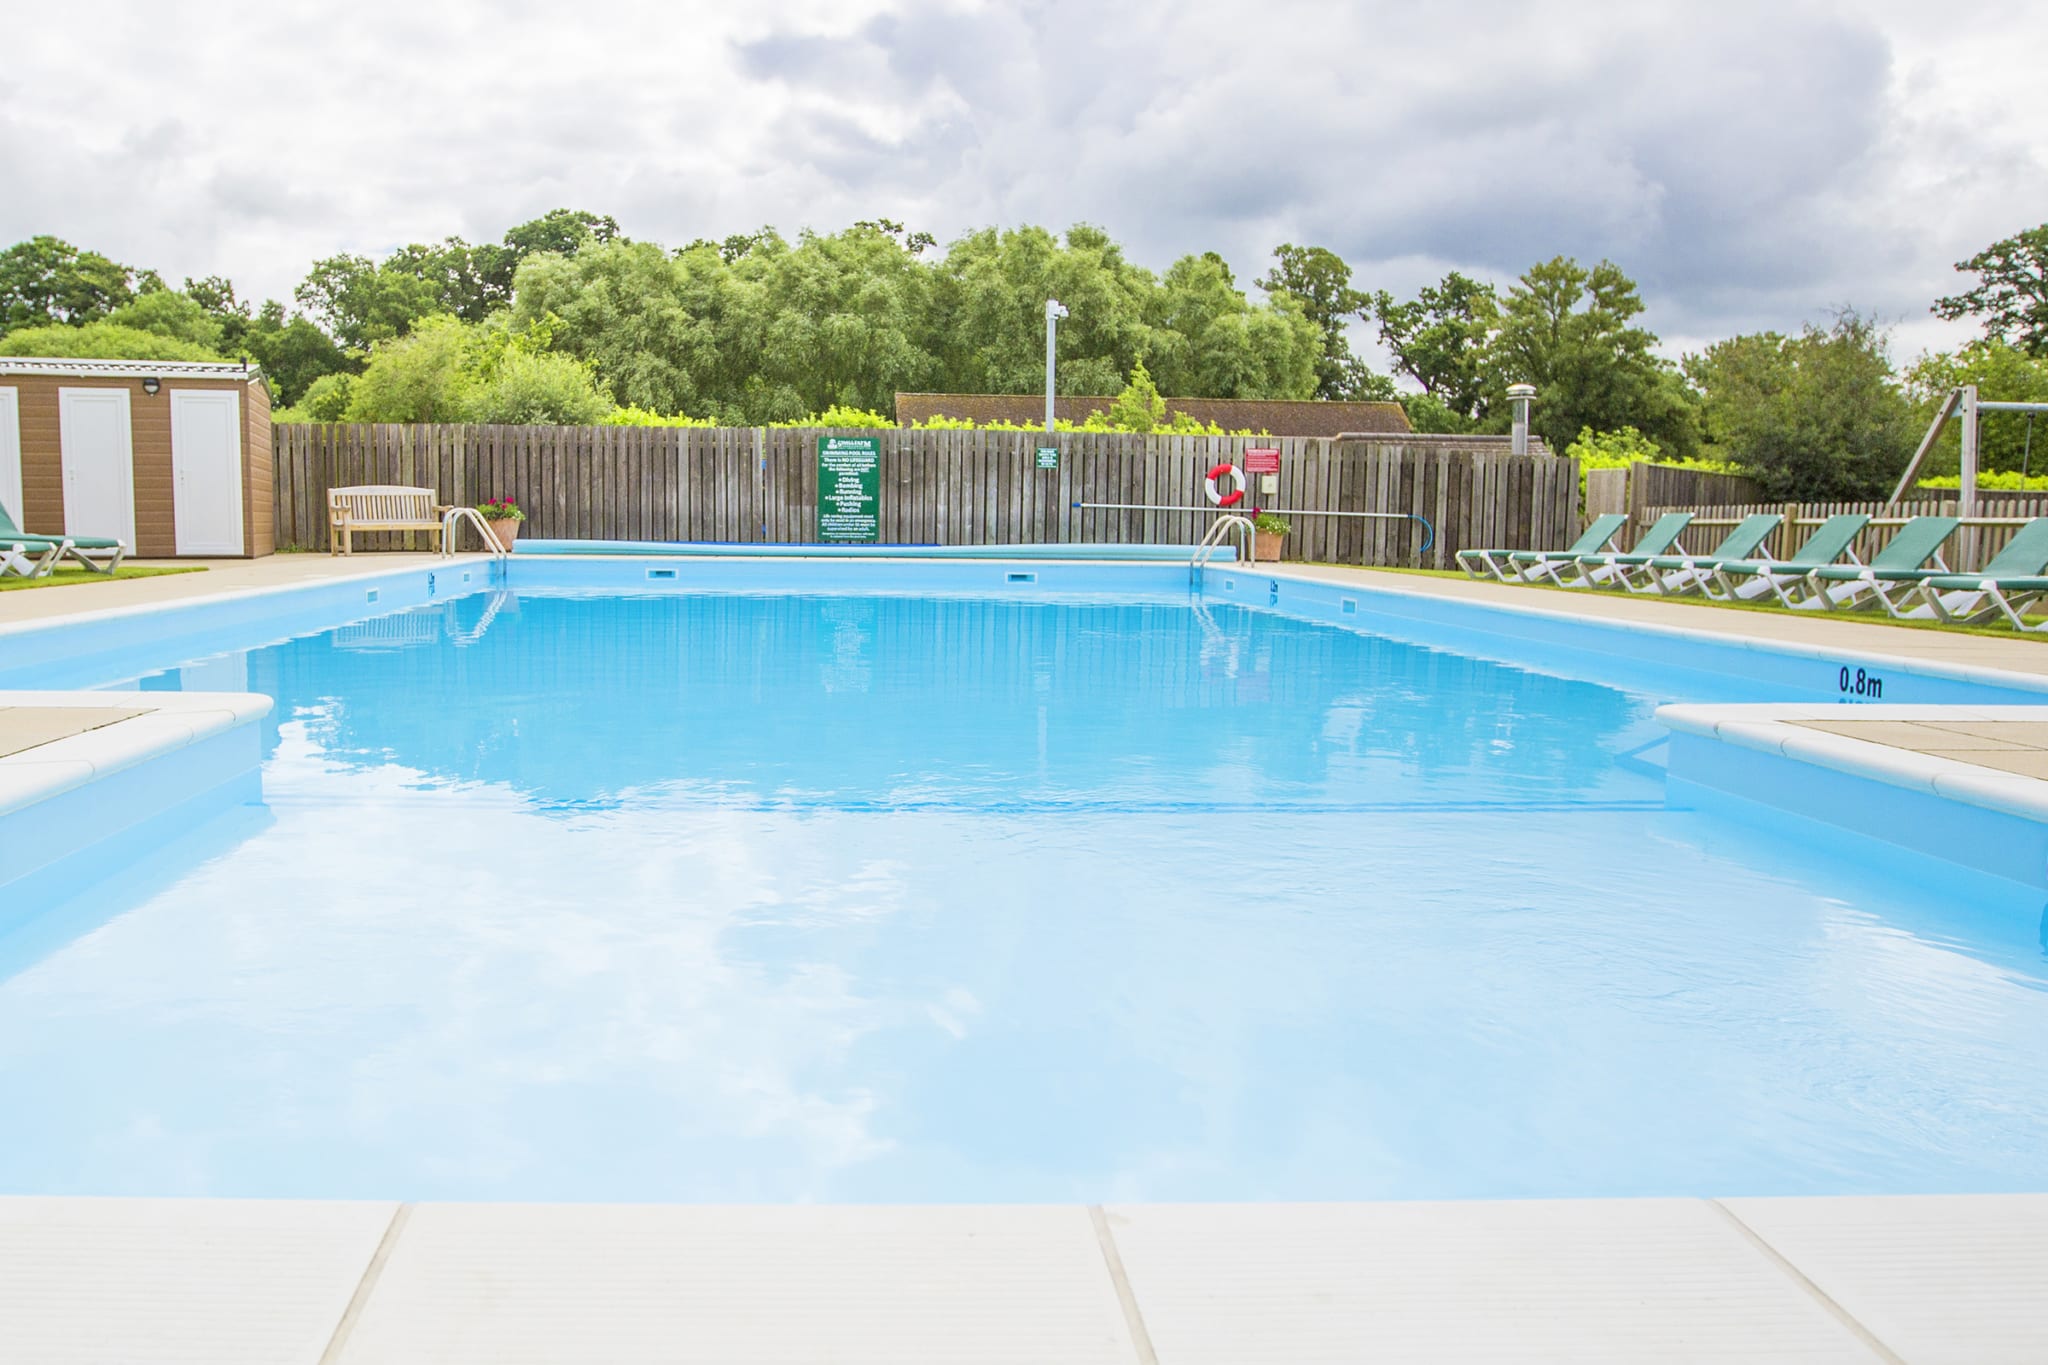 Swiss Farm Henley On Thames Heated Outdoor Swimming Pool